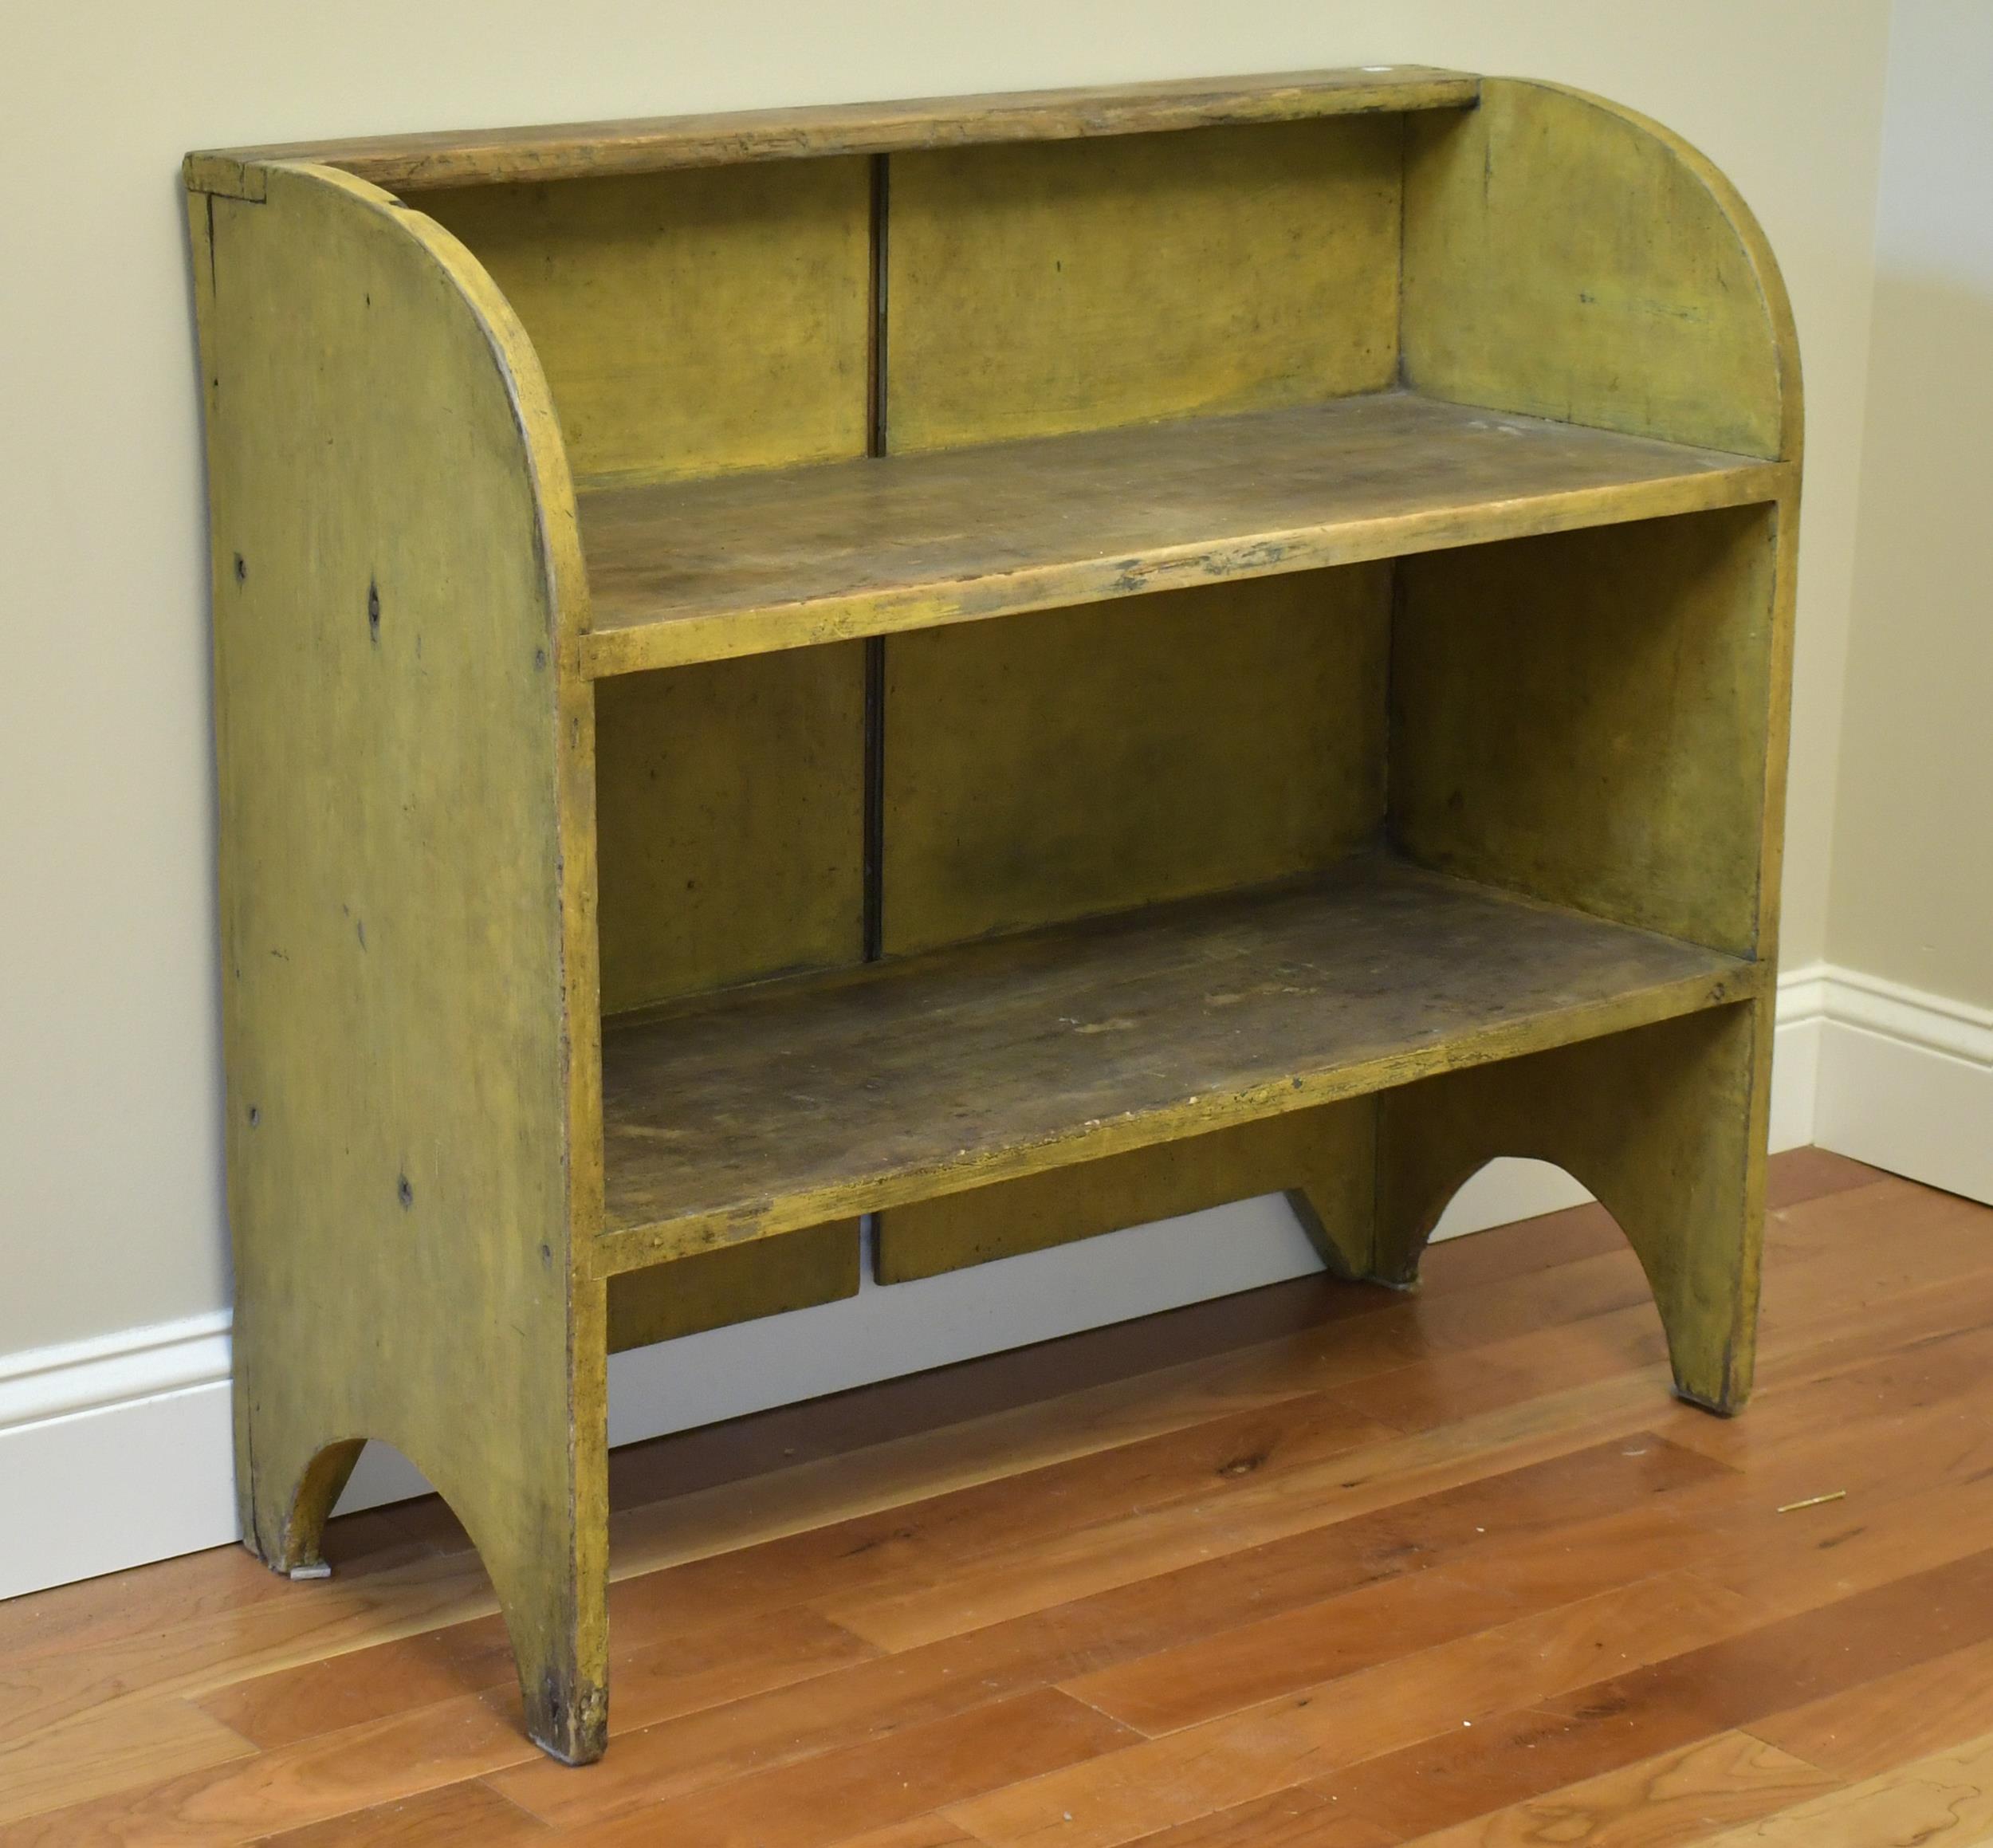 ANTIQUE YELLOW PAINTED BUCKET BENCH.